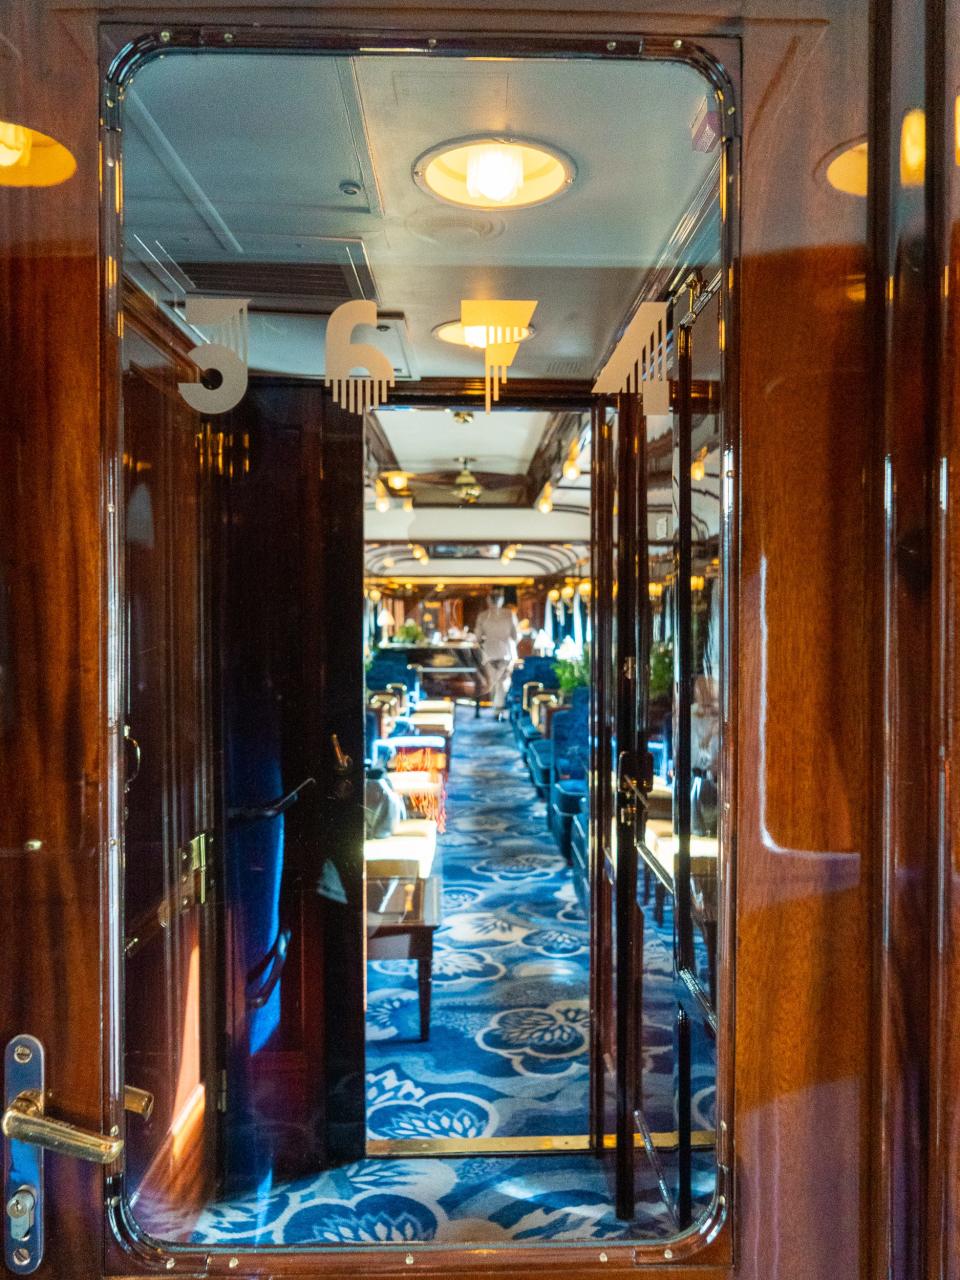 A shiny, windowed, wooden train door leads to a carriage with blue carpets and seating.